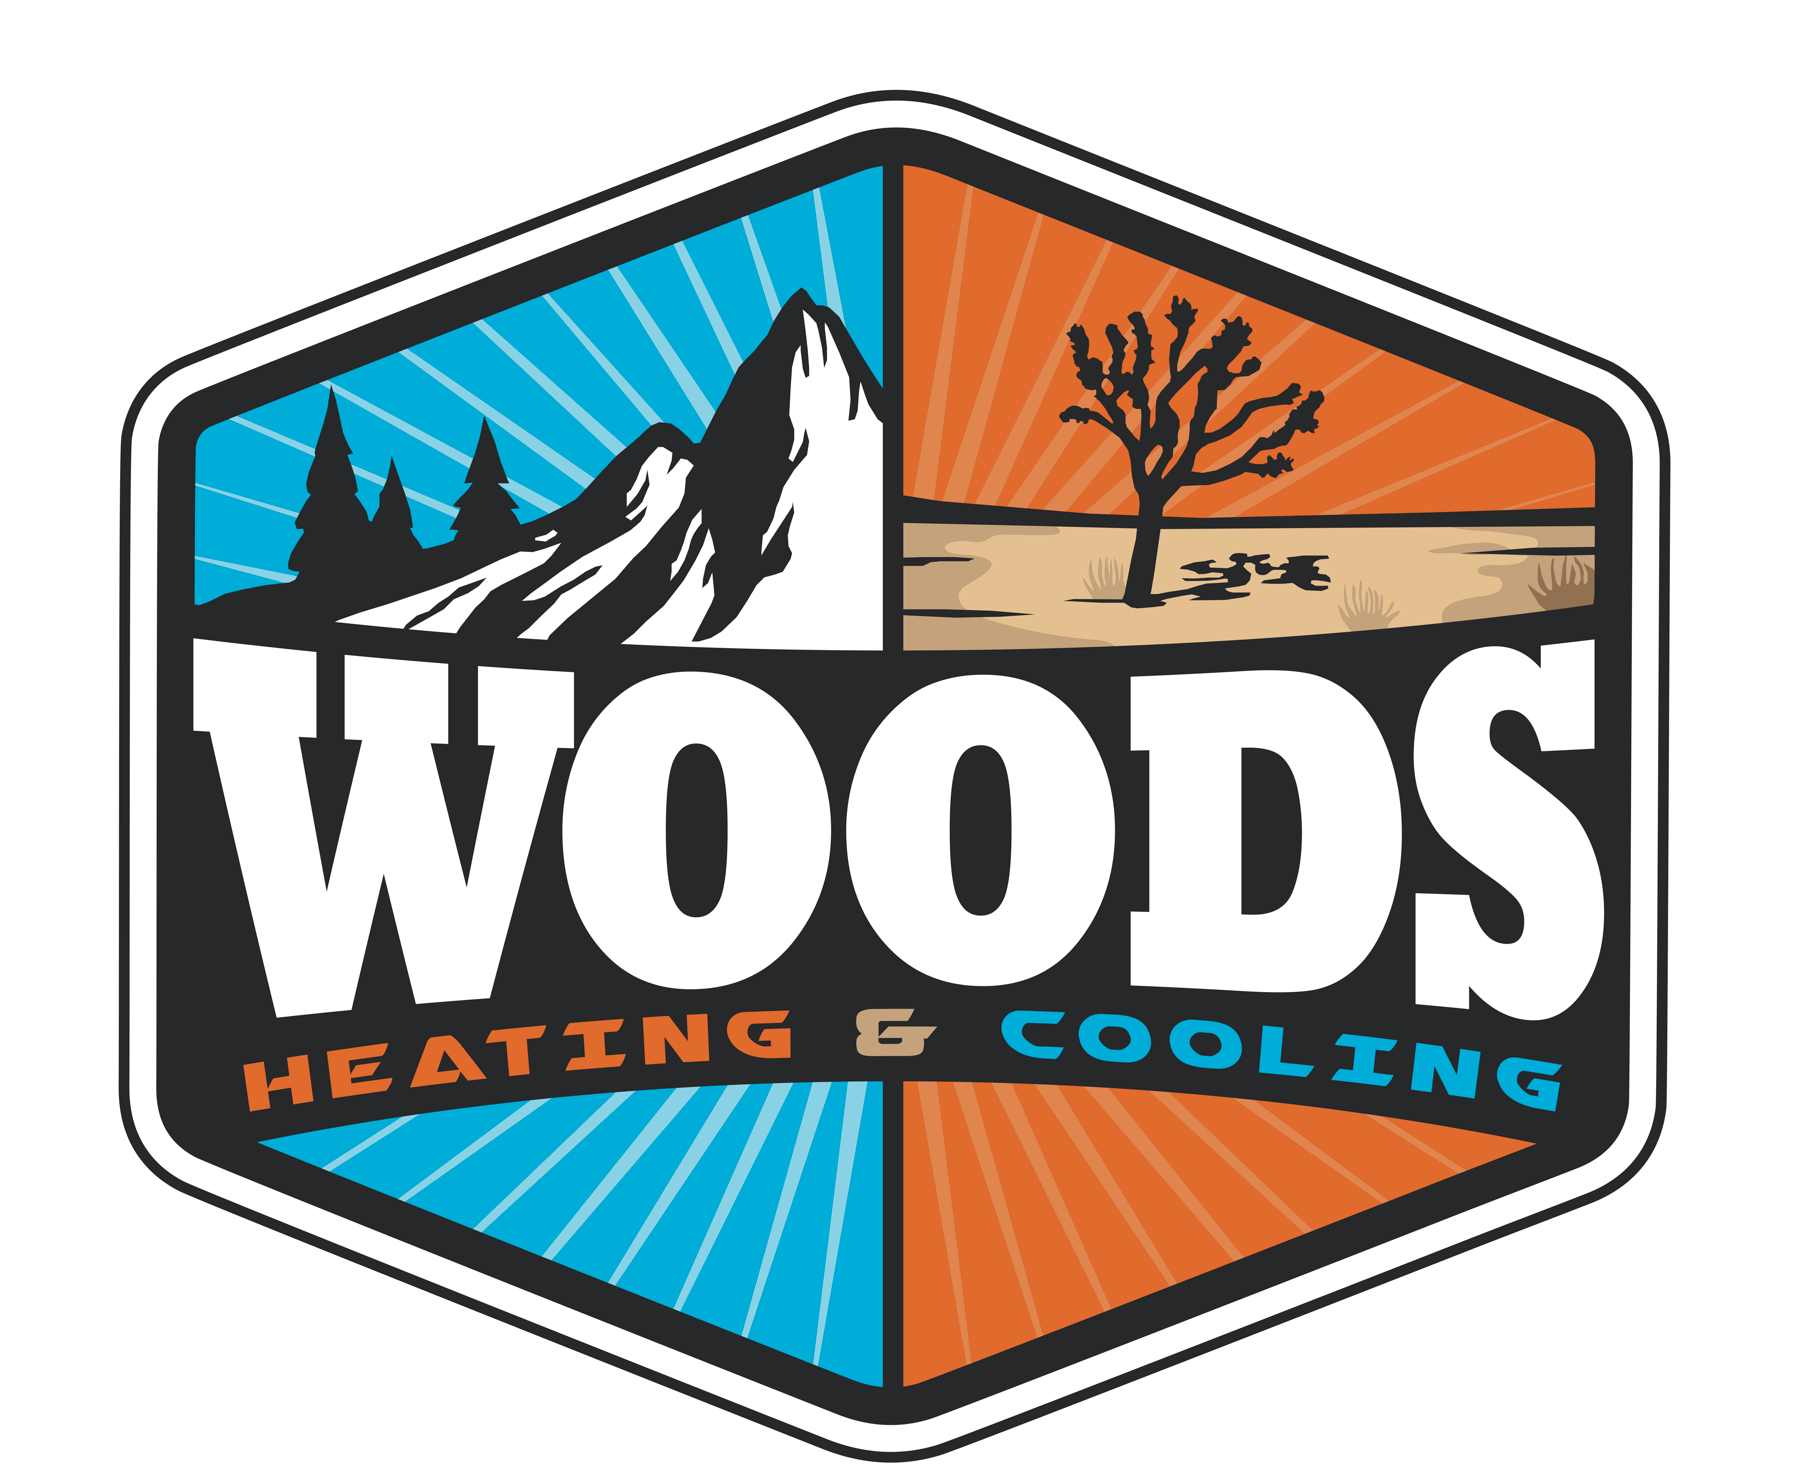 Wood's Heating & Cooling